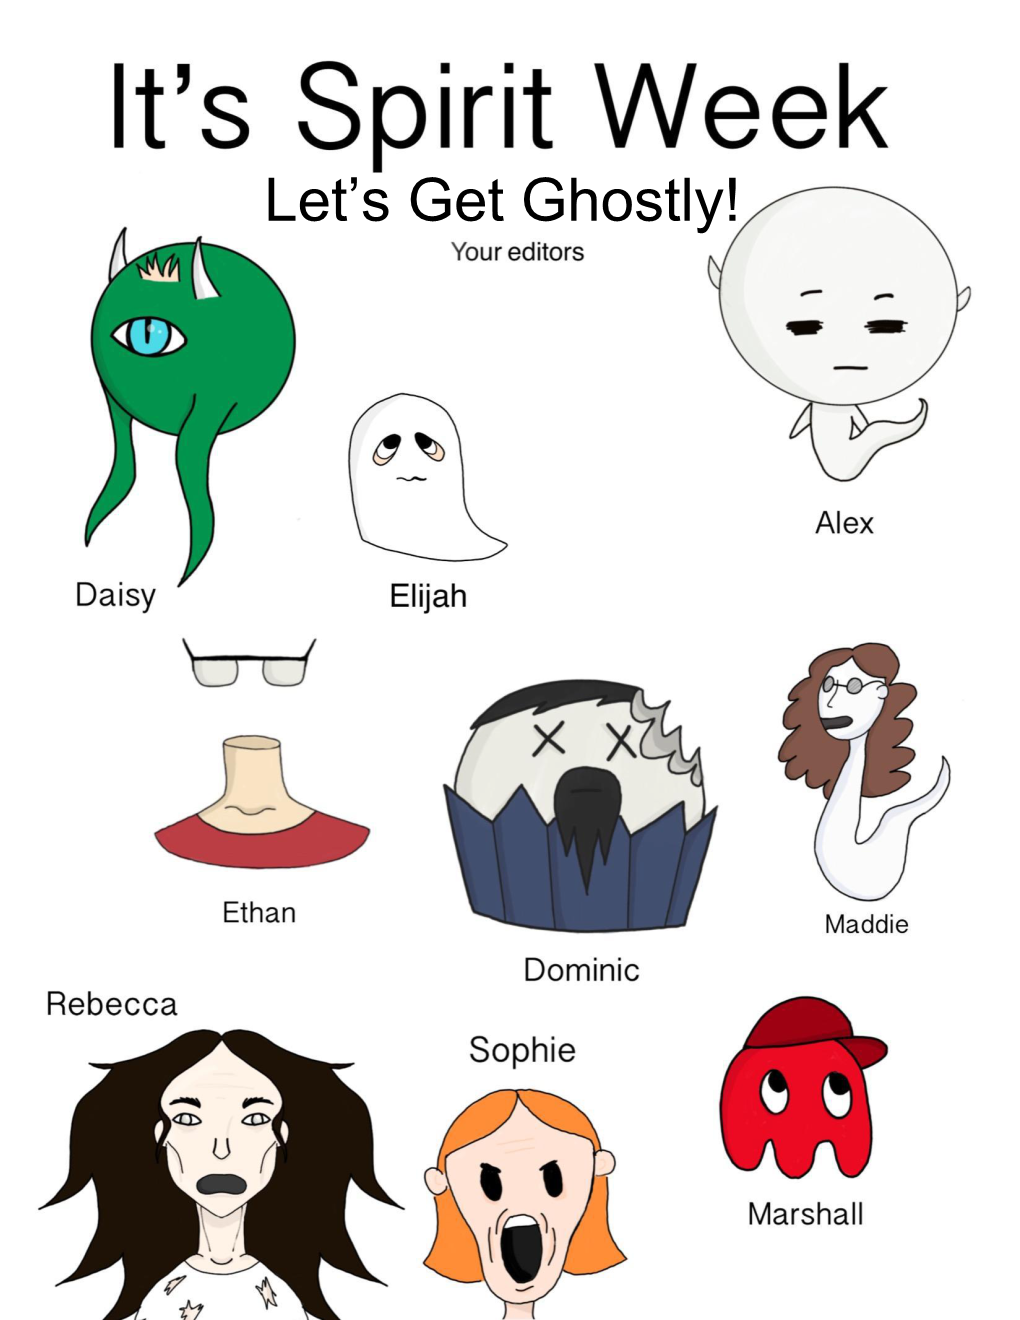 Let's Get Ghostly!